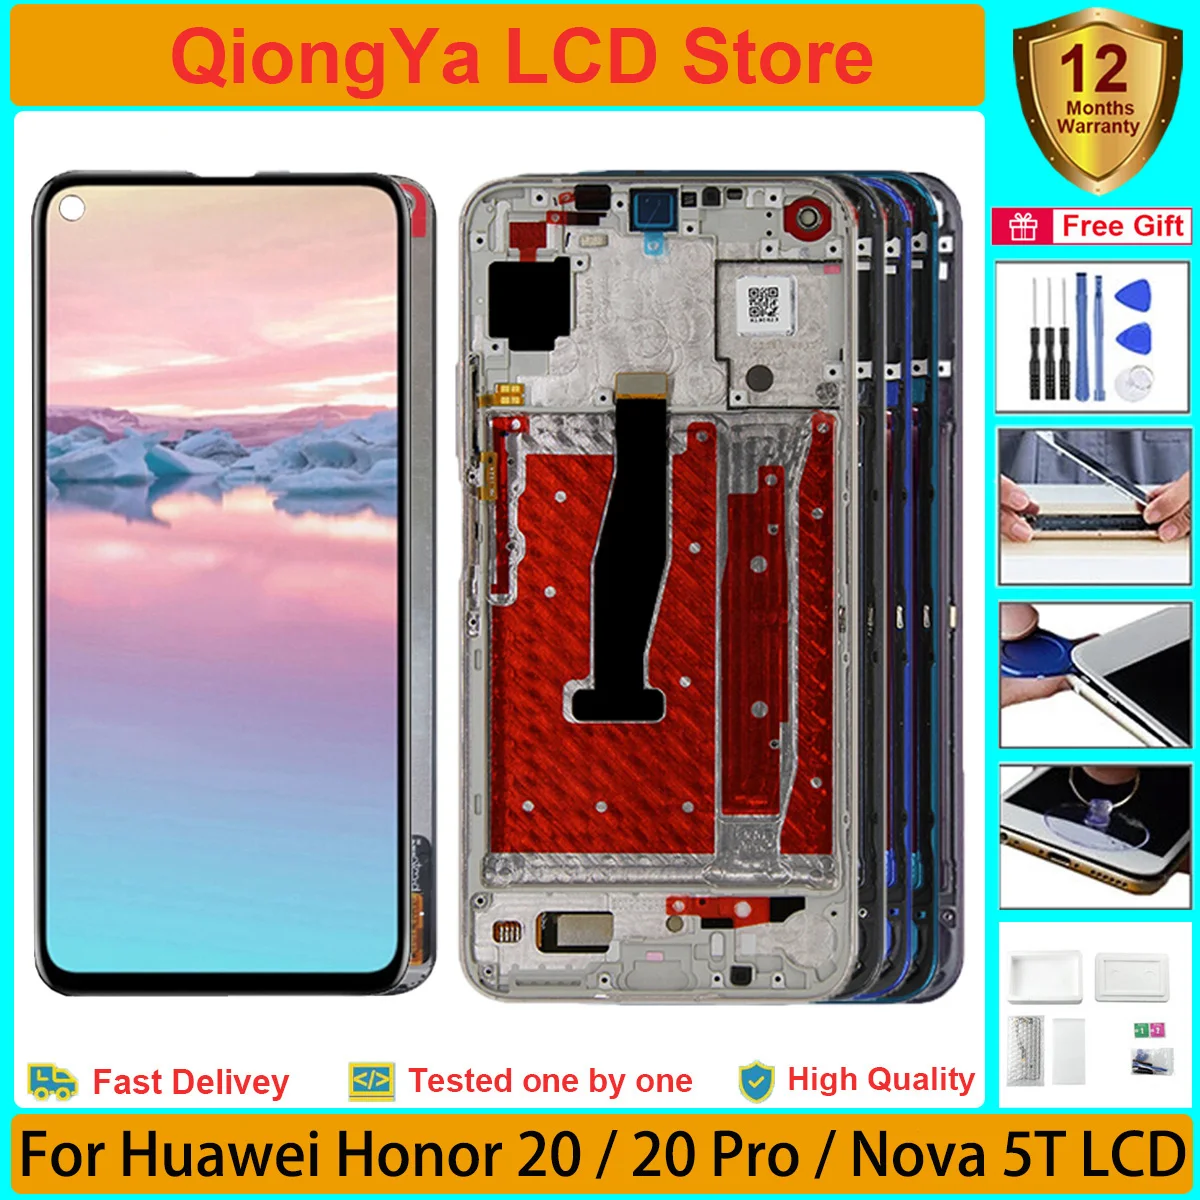 

New Original 6.26" Nova 5T Display For Huawei Honor 20 YAL-L21 YAL-AL10 / 20 Pro LCD with Touch Screen Digitizer Assembly Part